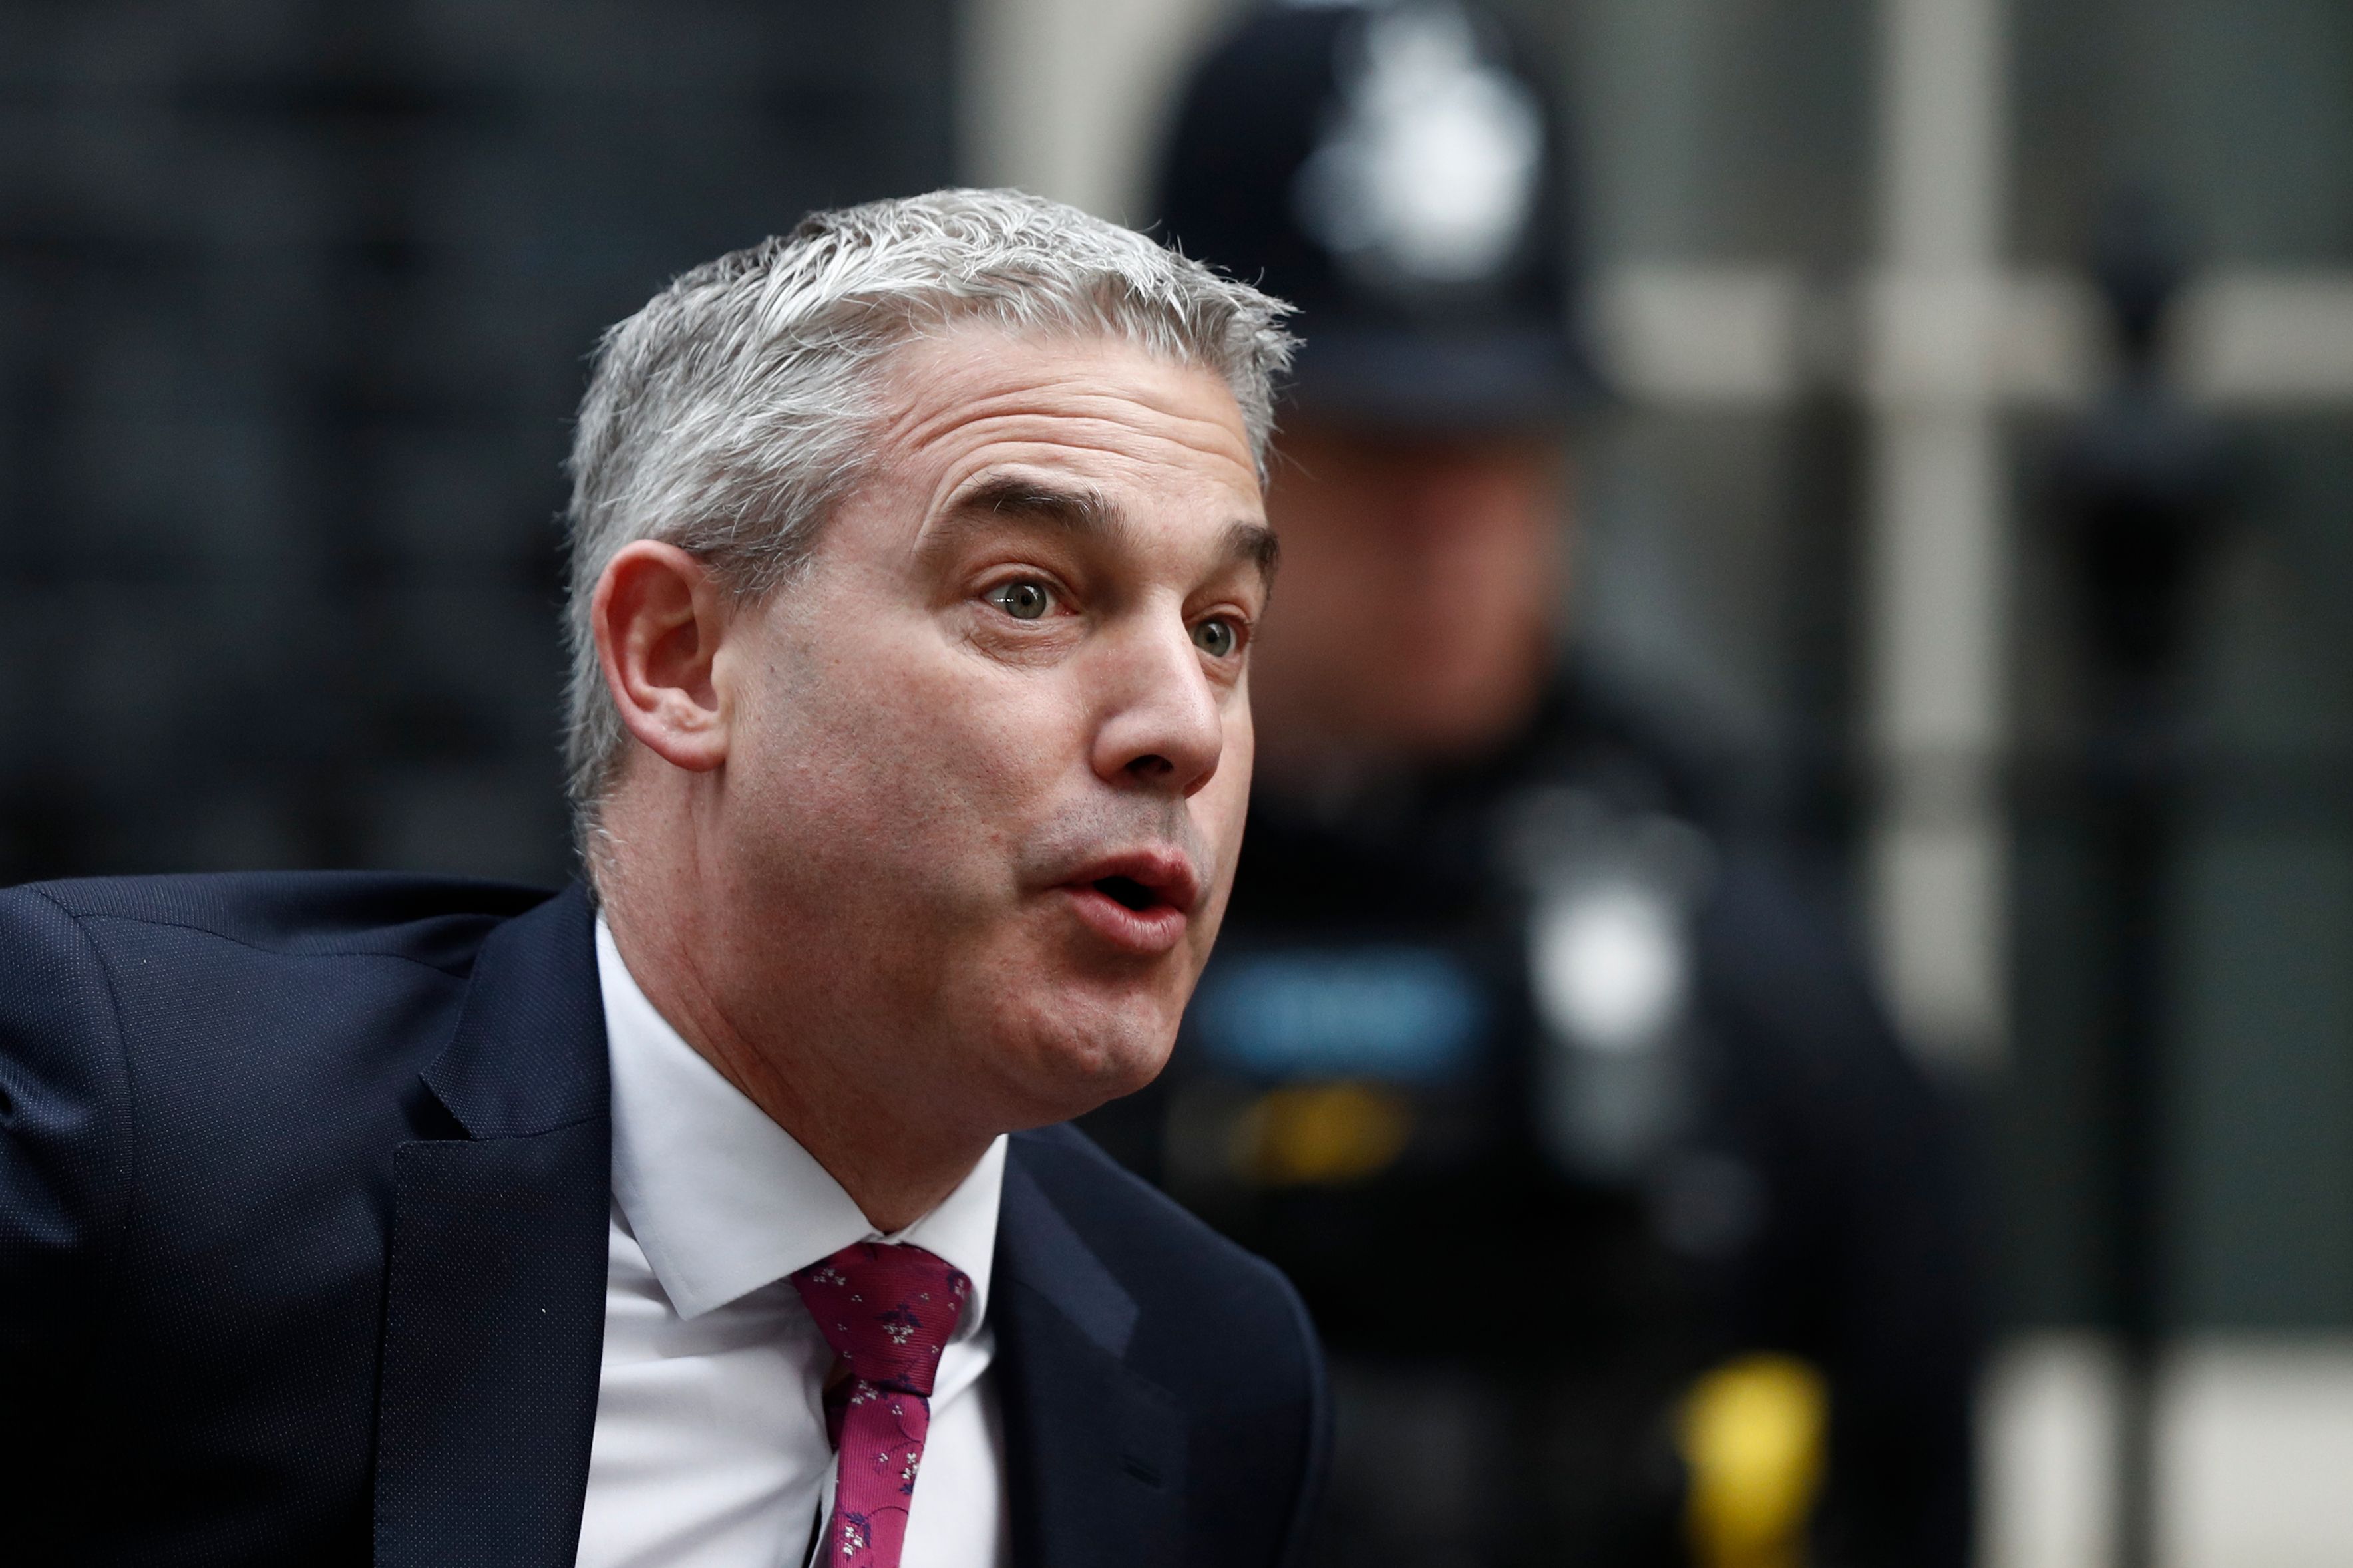 Britain's Secretary of State for Exiting the European Union Stephen Barclay arriving in Downing Street on Tuesday.